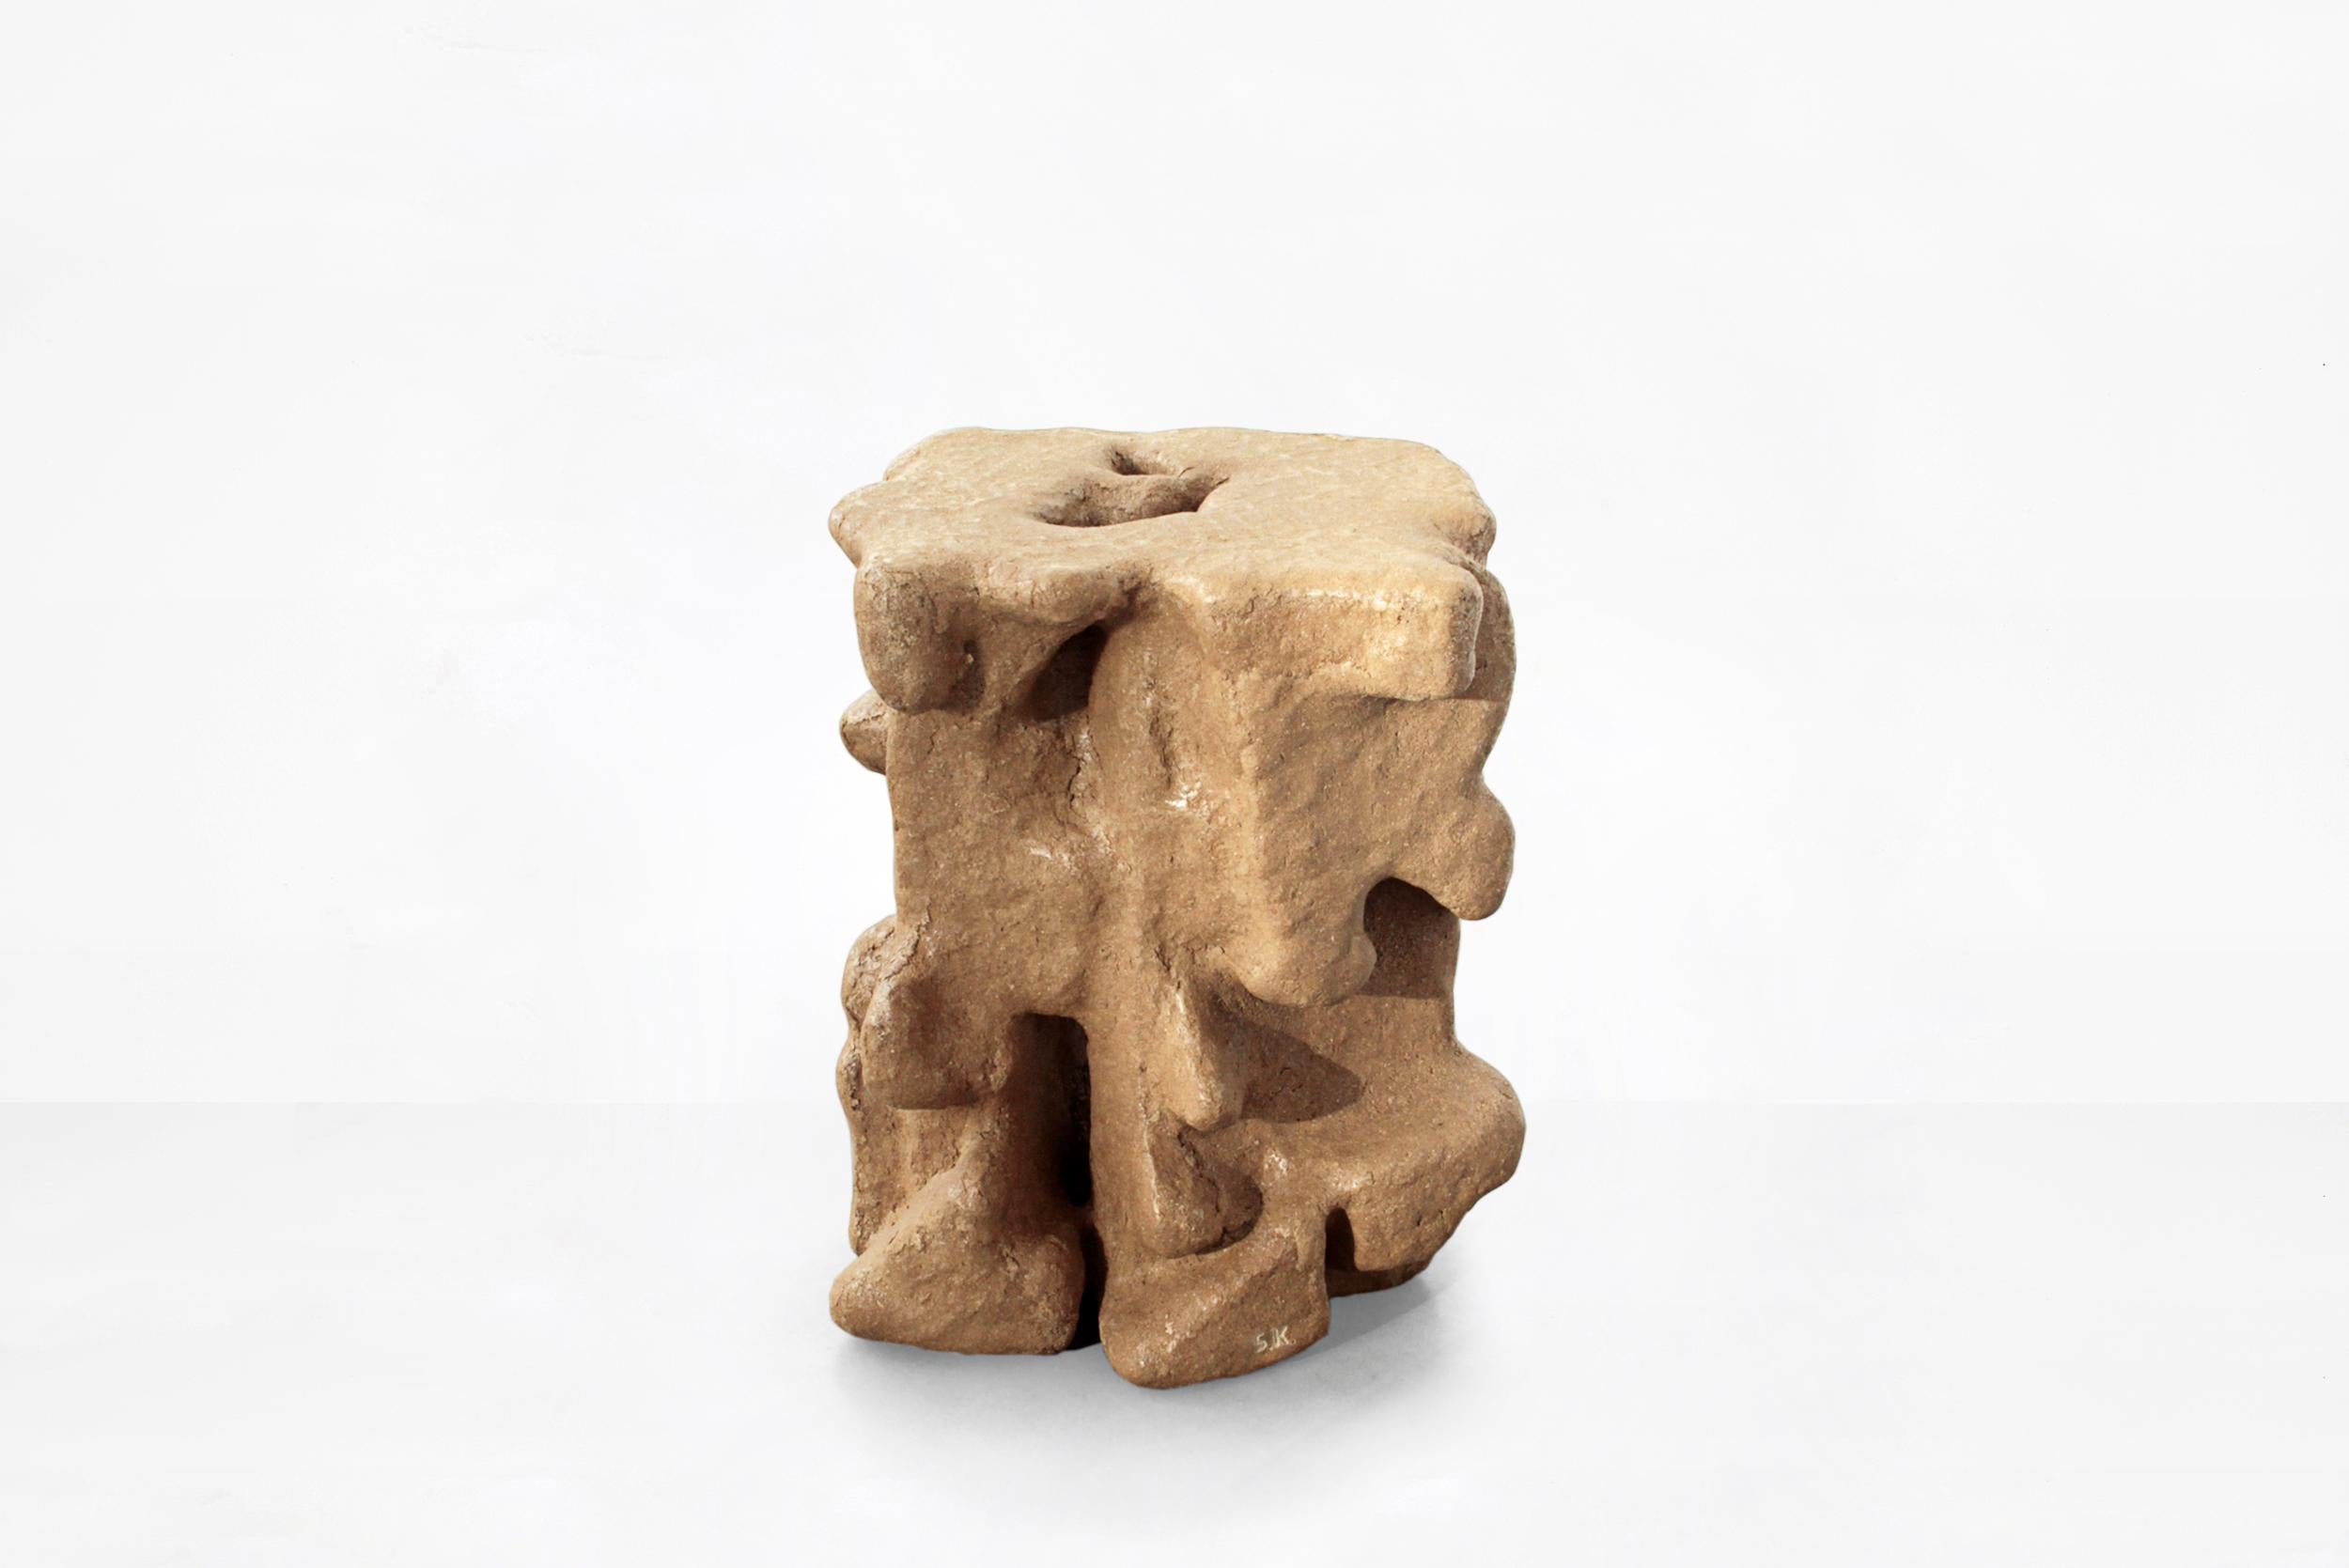 Modern Sigve Knutson Wood Clay Side Table, Manufactured by Sigve Knutson, Oslo, 2019